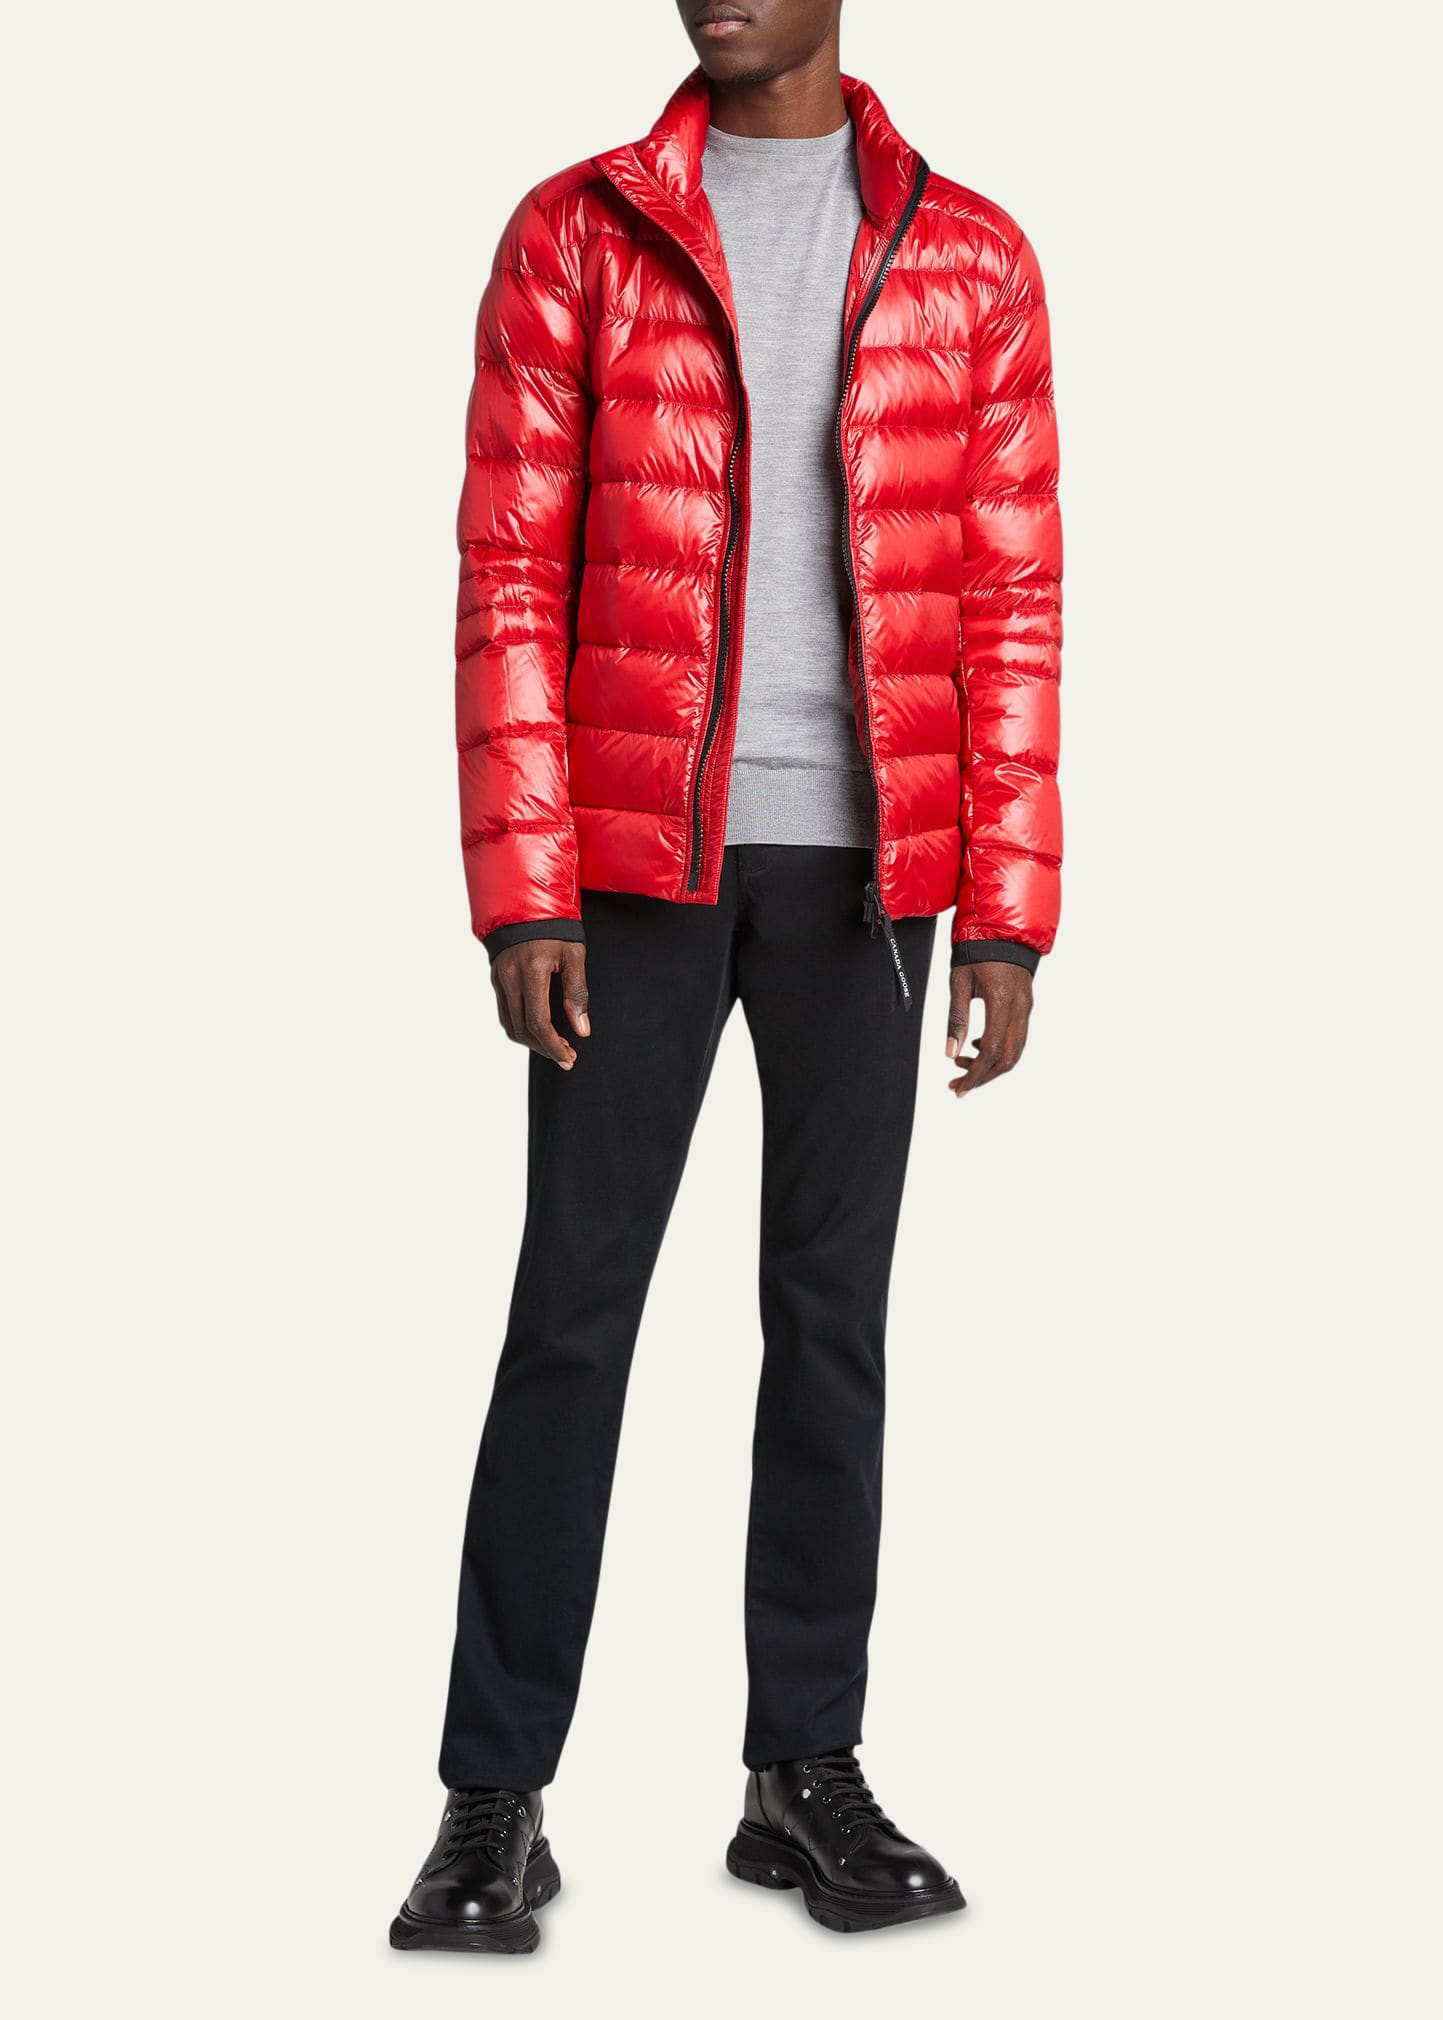 Canada Goose Men's Crofton Lightweight Quilted Packable Jacket